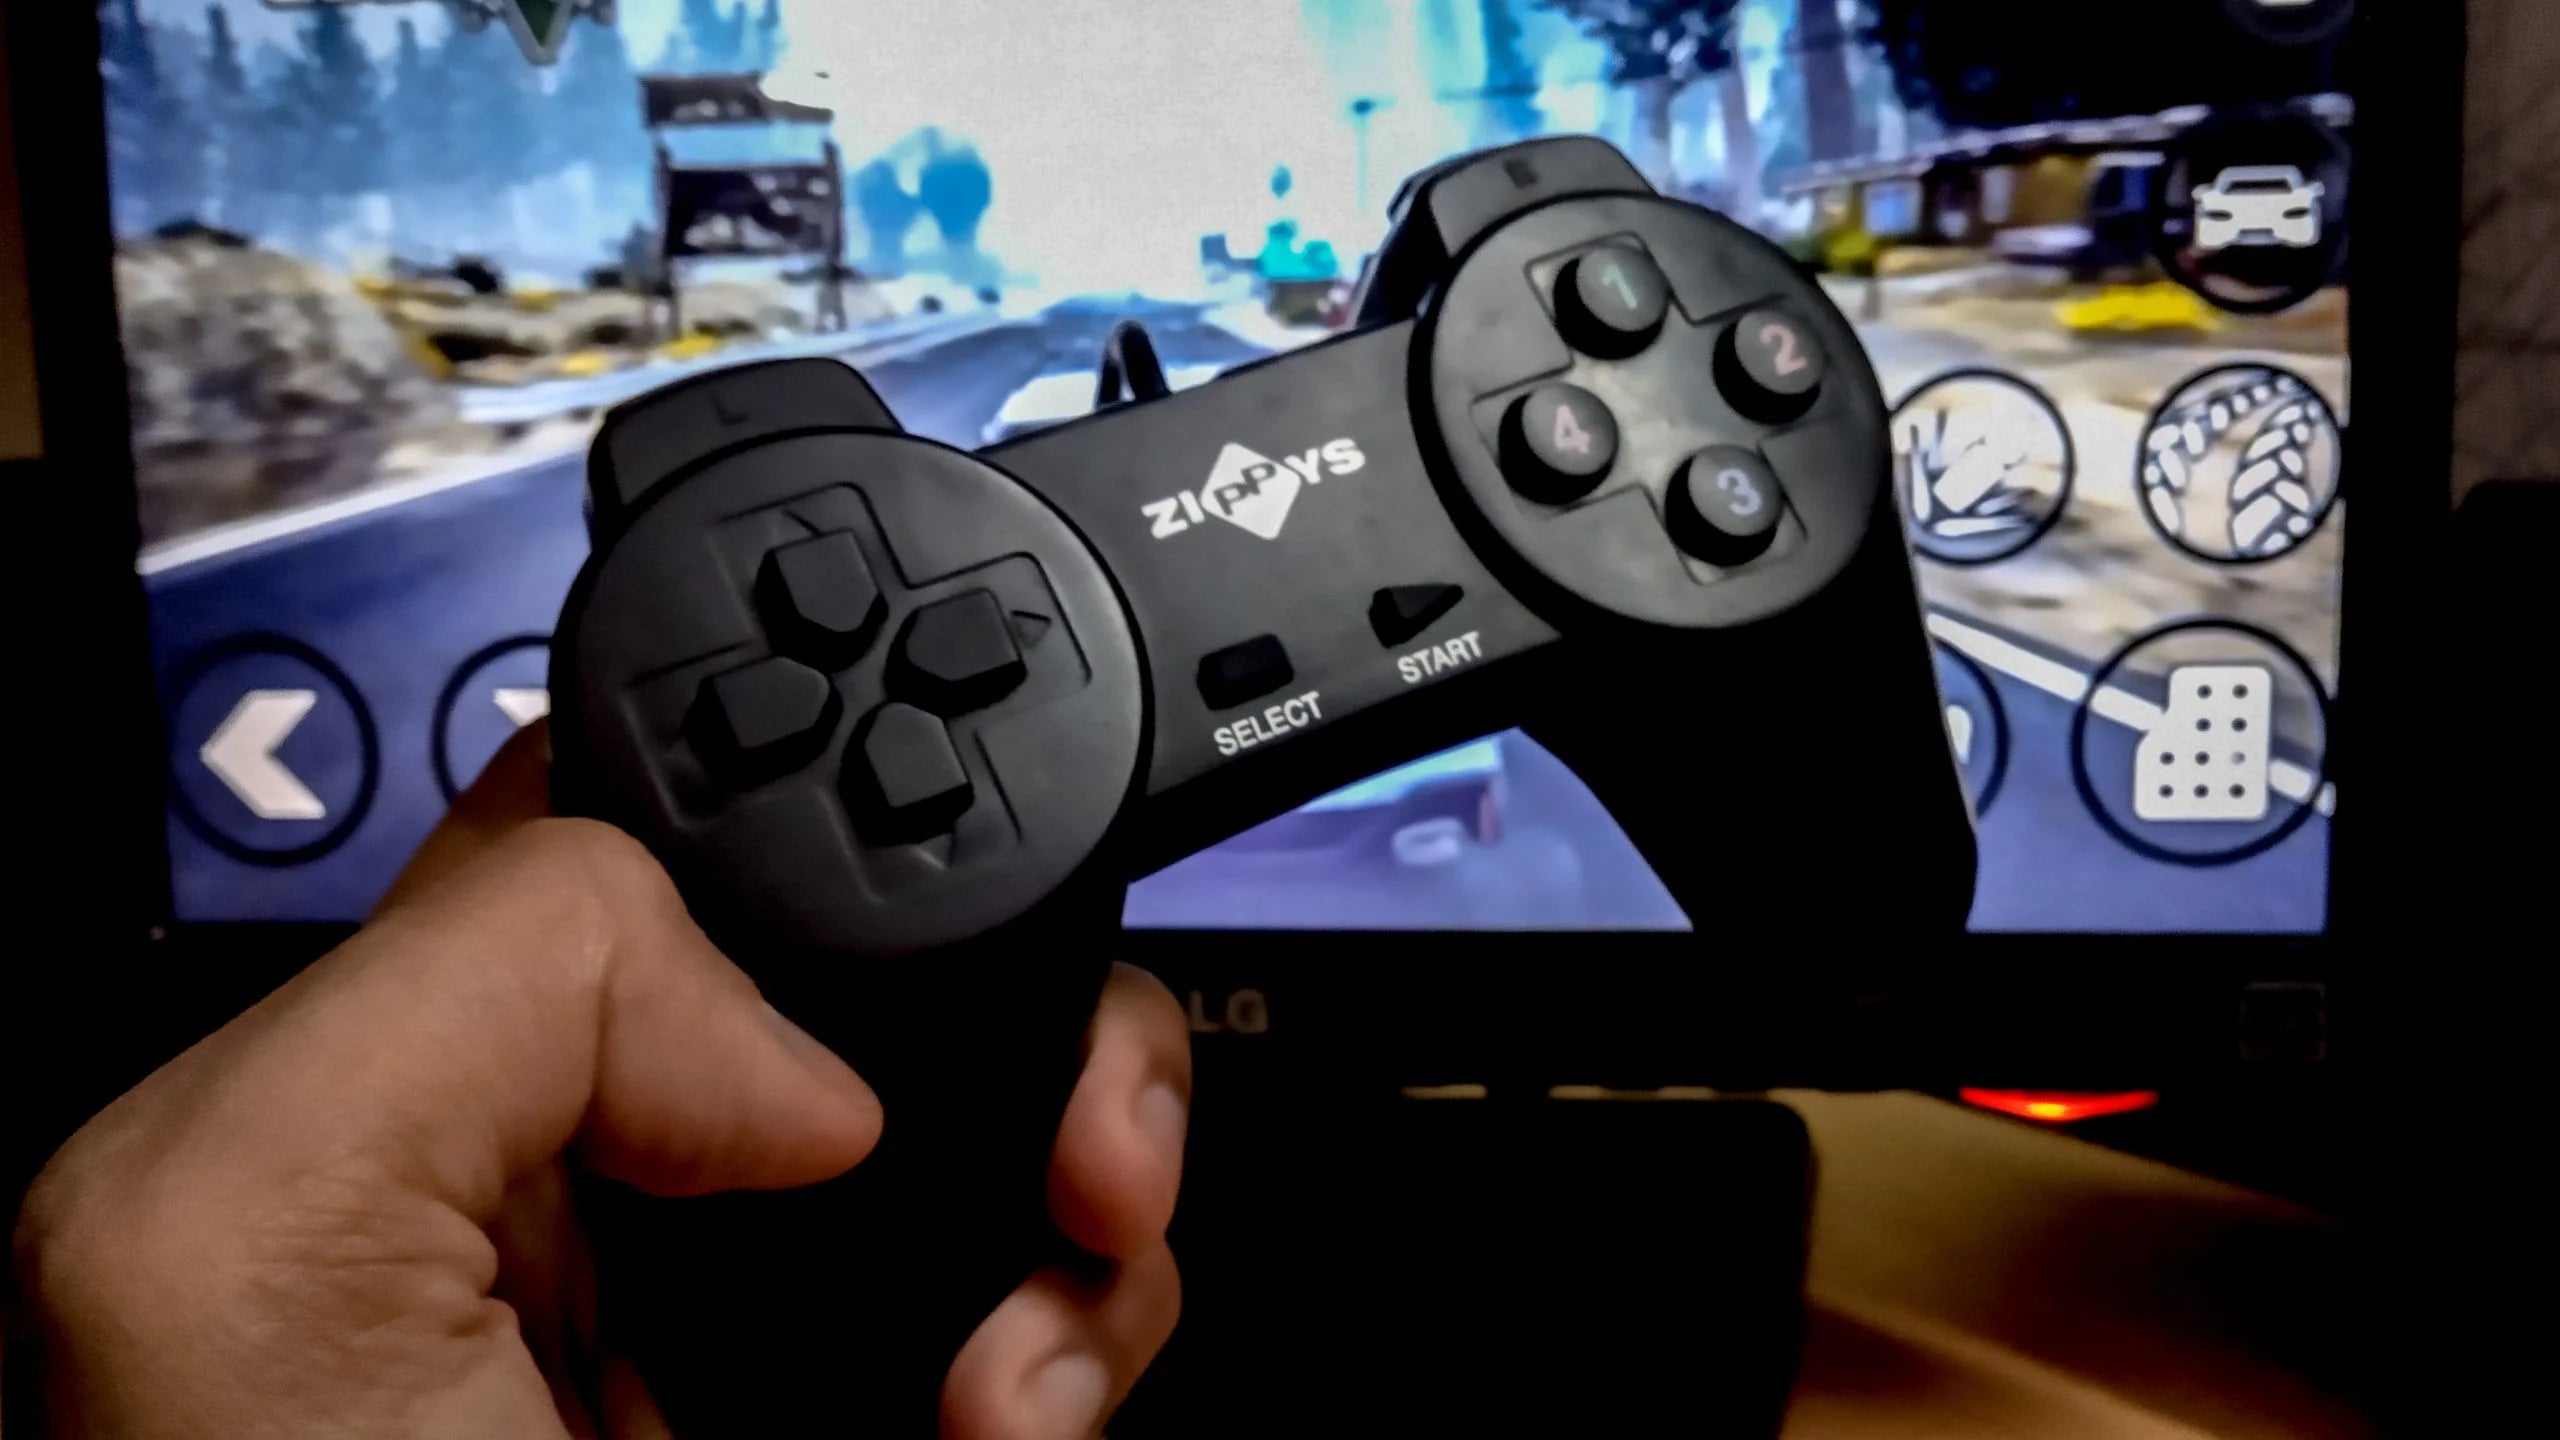 Gaming Accessories in Qatar That Could Help Improve Your Game Play - Think24 Gaming & Gadgets Qatar